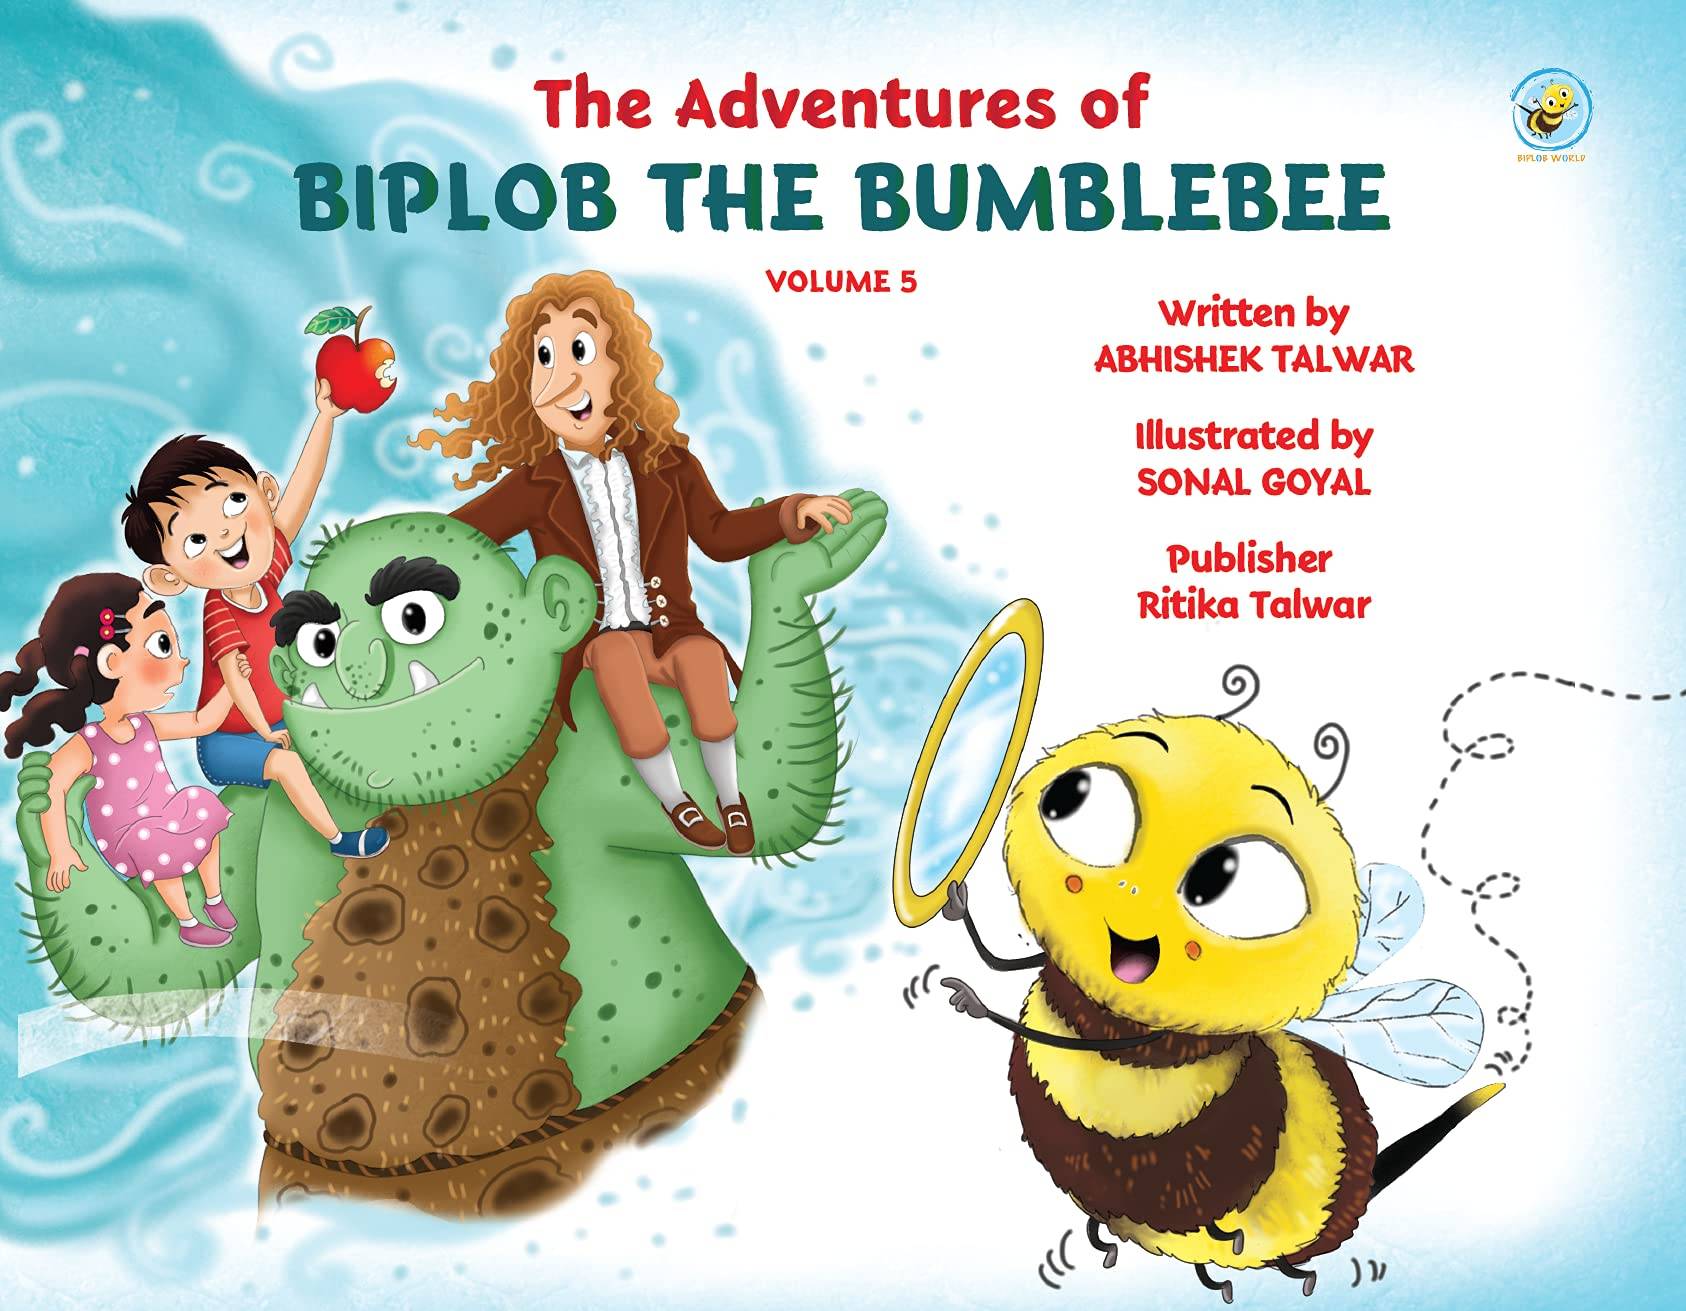 IMG : The Adventures of Biplob the Bumblebee Vol 5